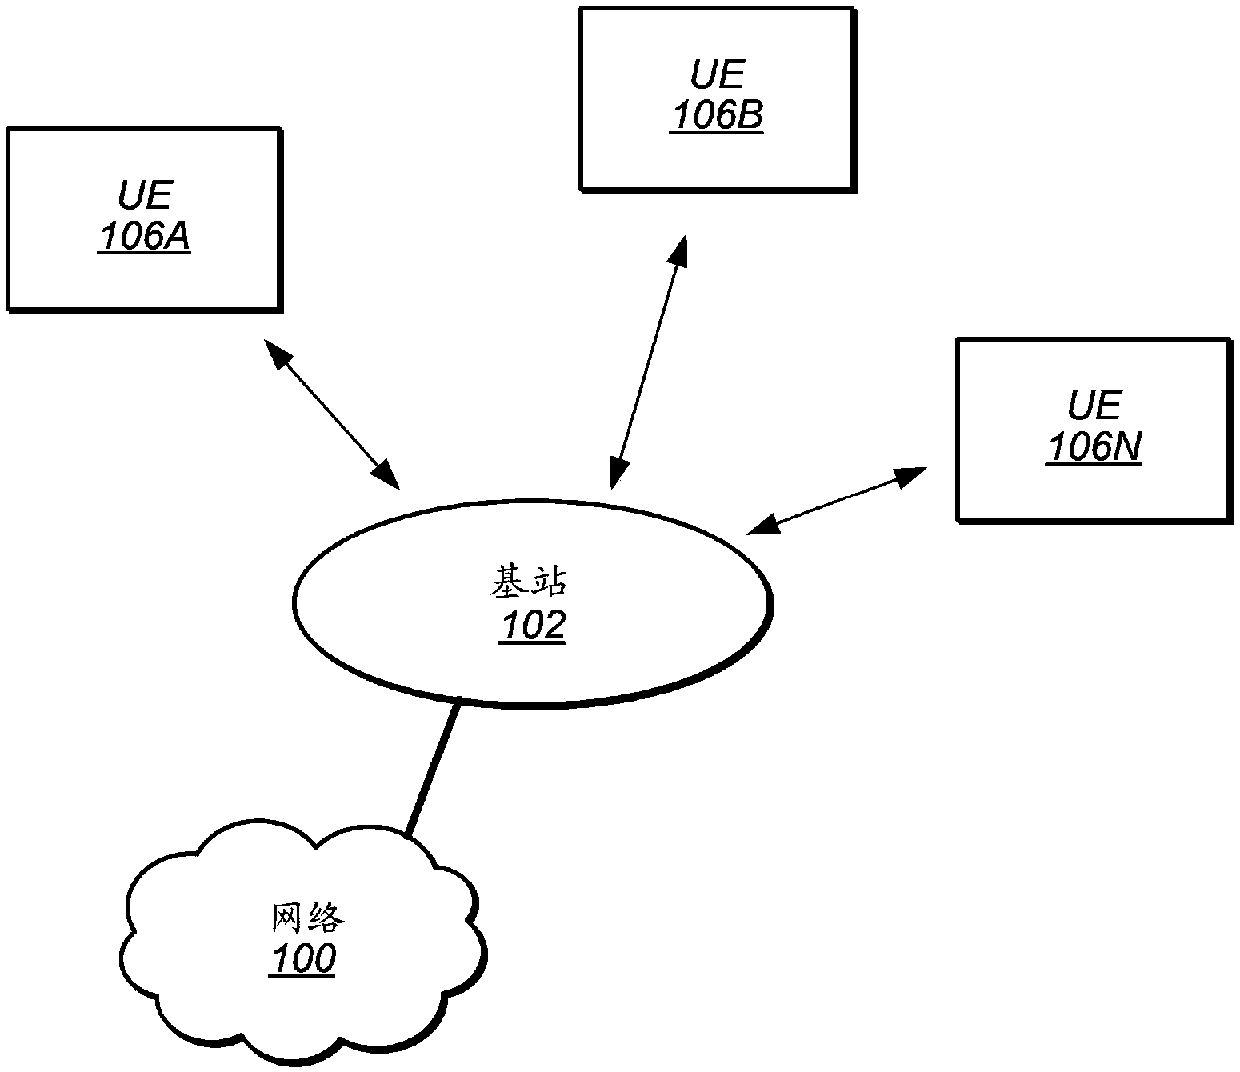 License assisted access communication with dynamic use of request-to-send and clear-to-send messages